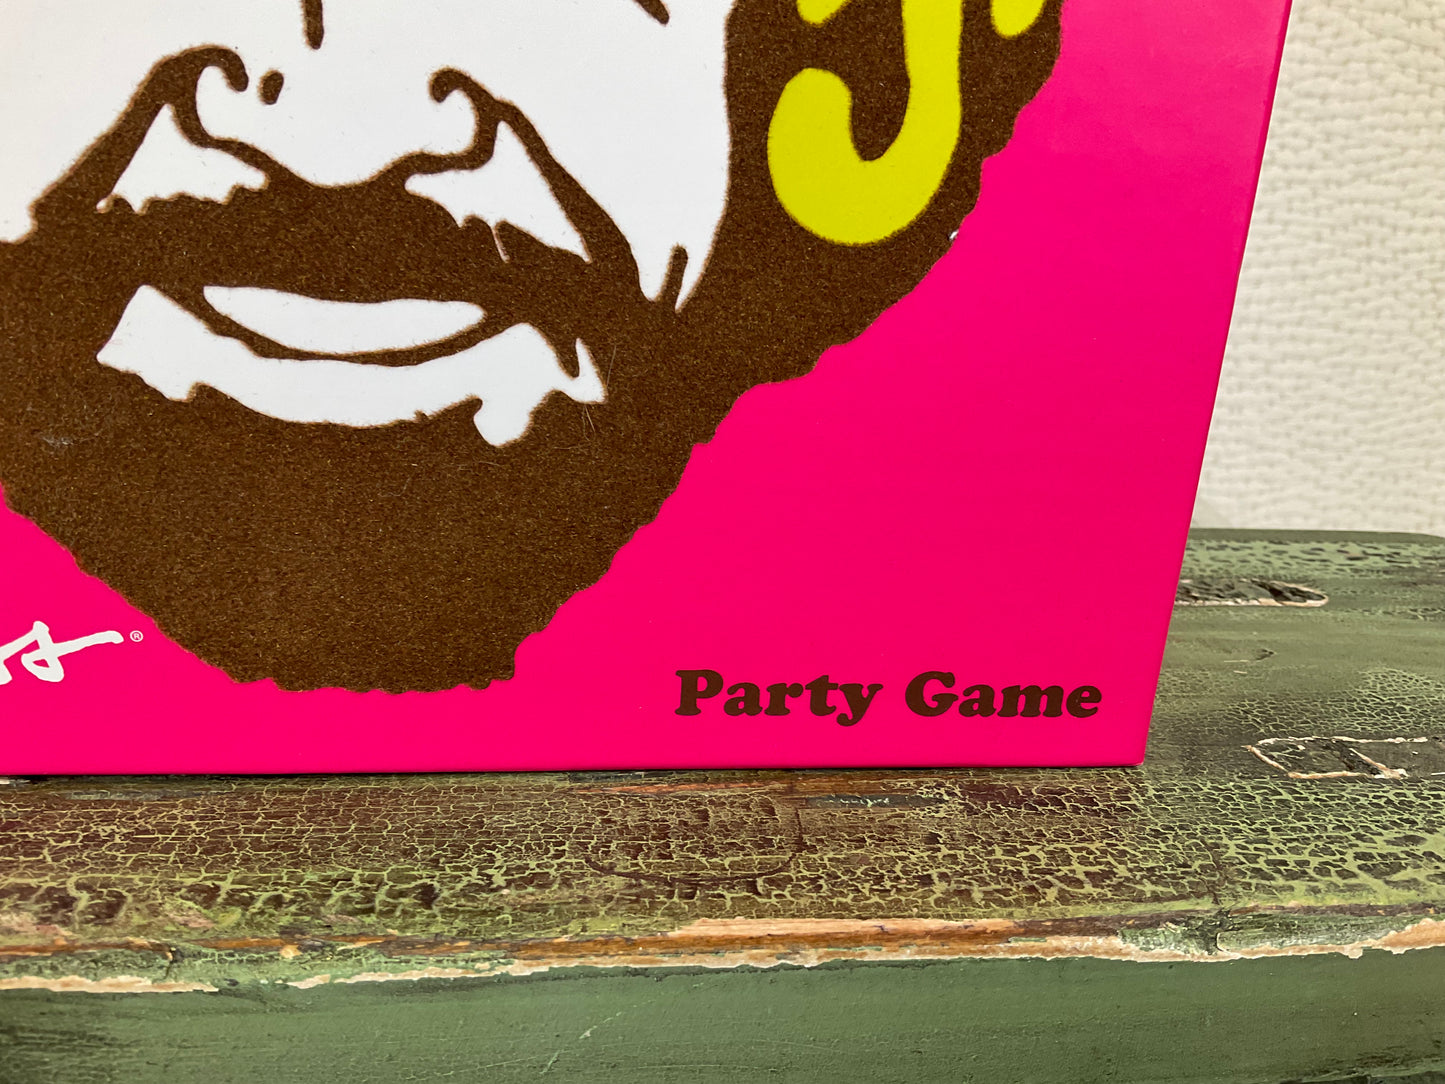 Bob Ross Happy Little Accidents Party Game